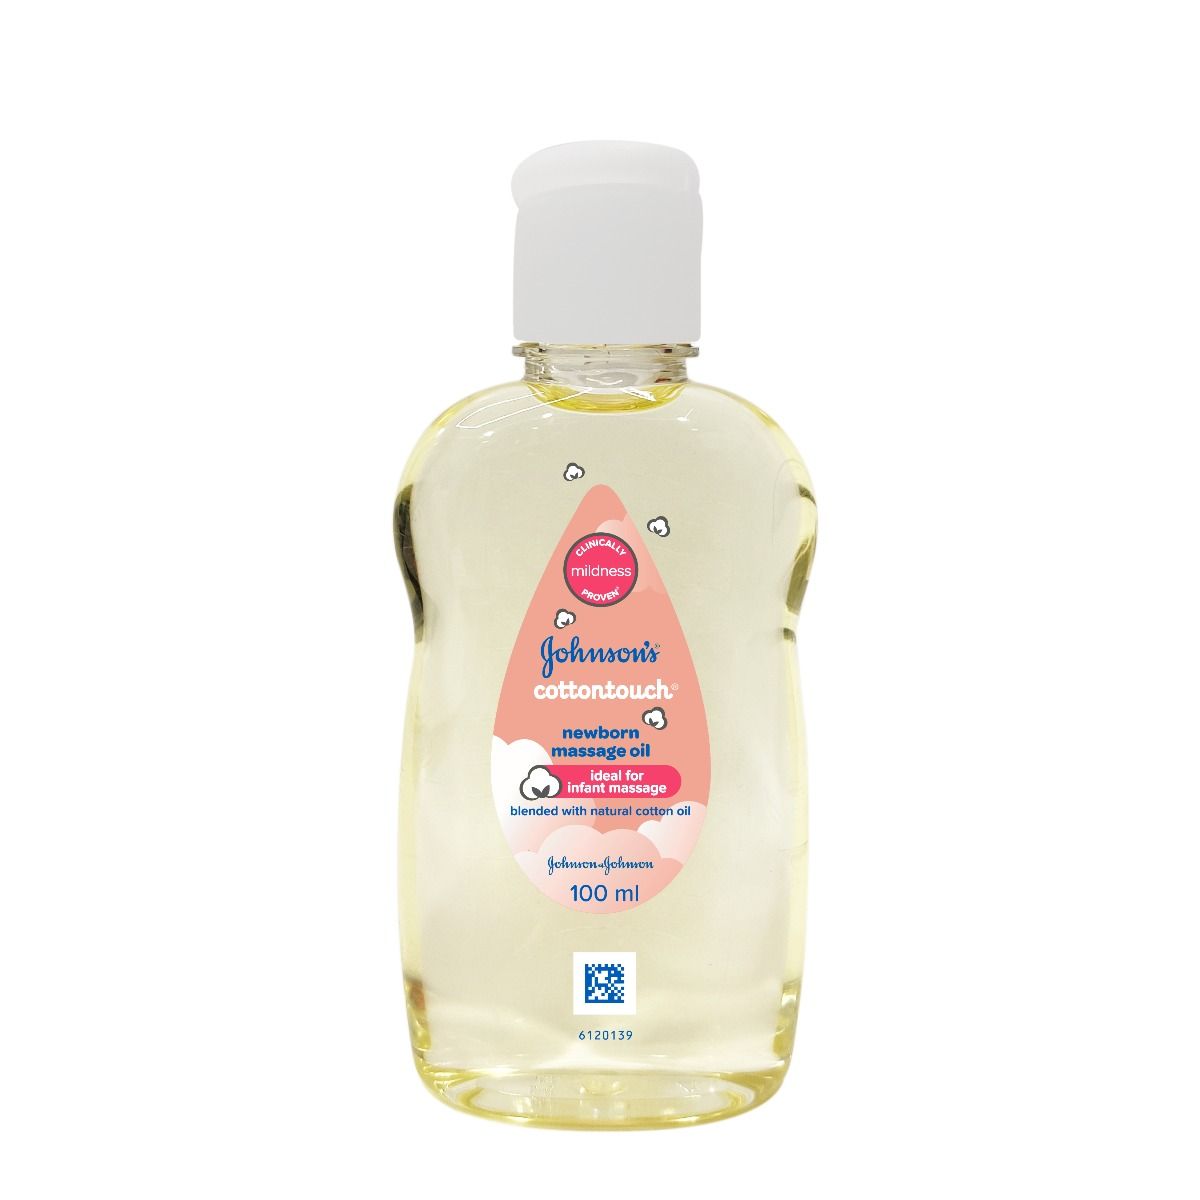 Johnson's Cottontouch New Born Massage Oil, 100 ml, Pack of 1 